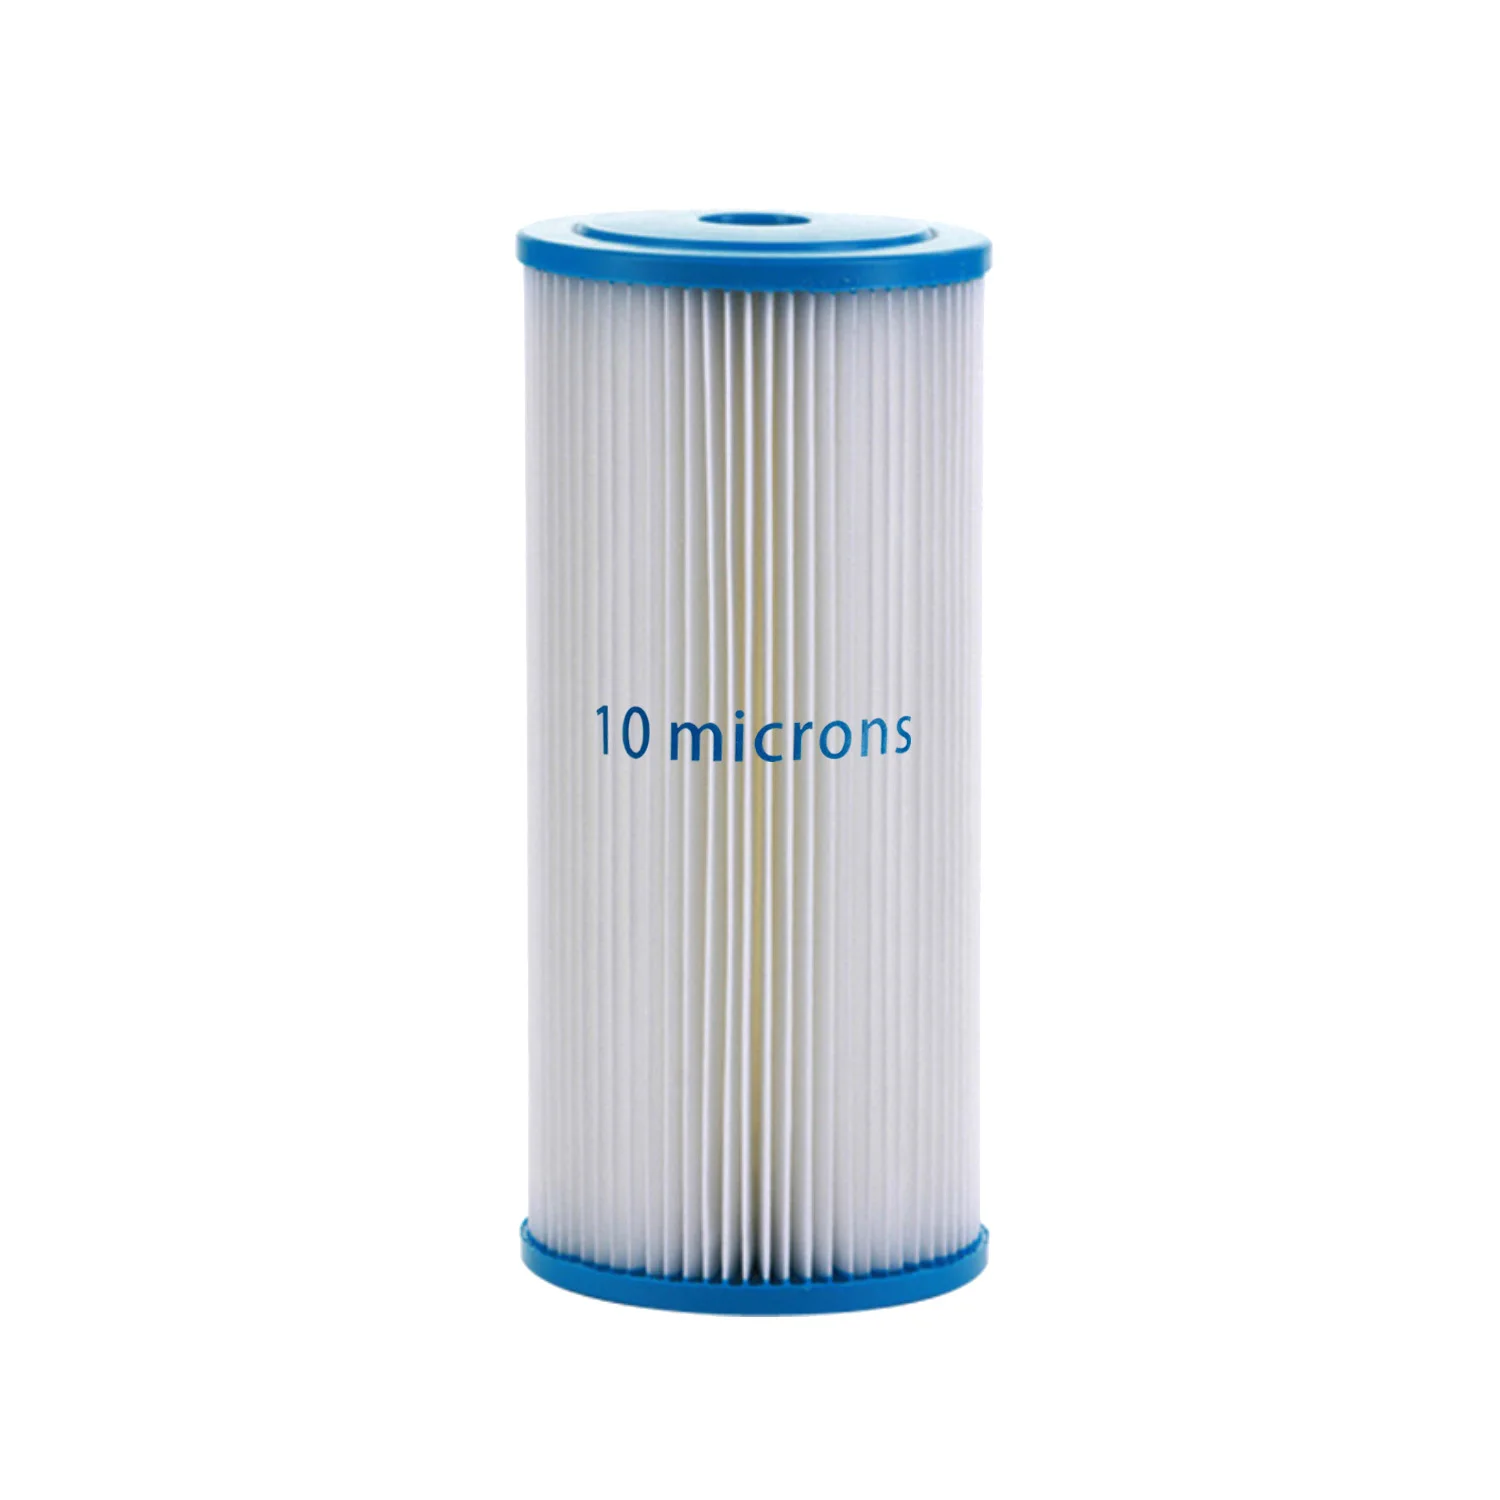 

10 Microns Sediment Pleated Water Filter Cartridge Whole House Commercial Industrial 4.5" x 10 Inch , Washable and Reusable